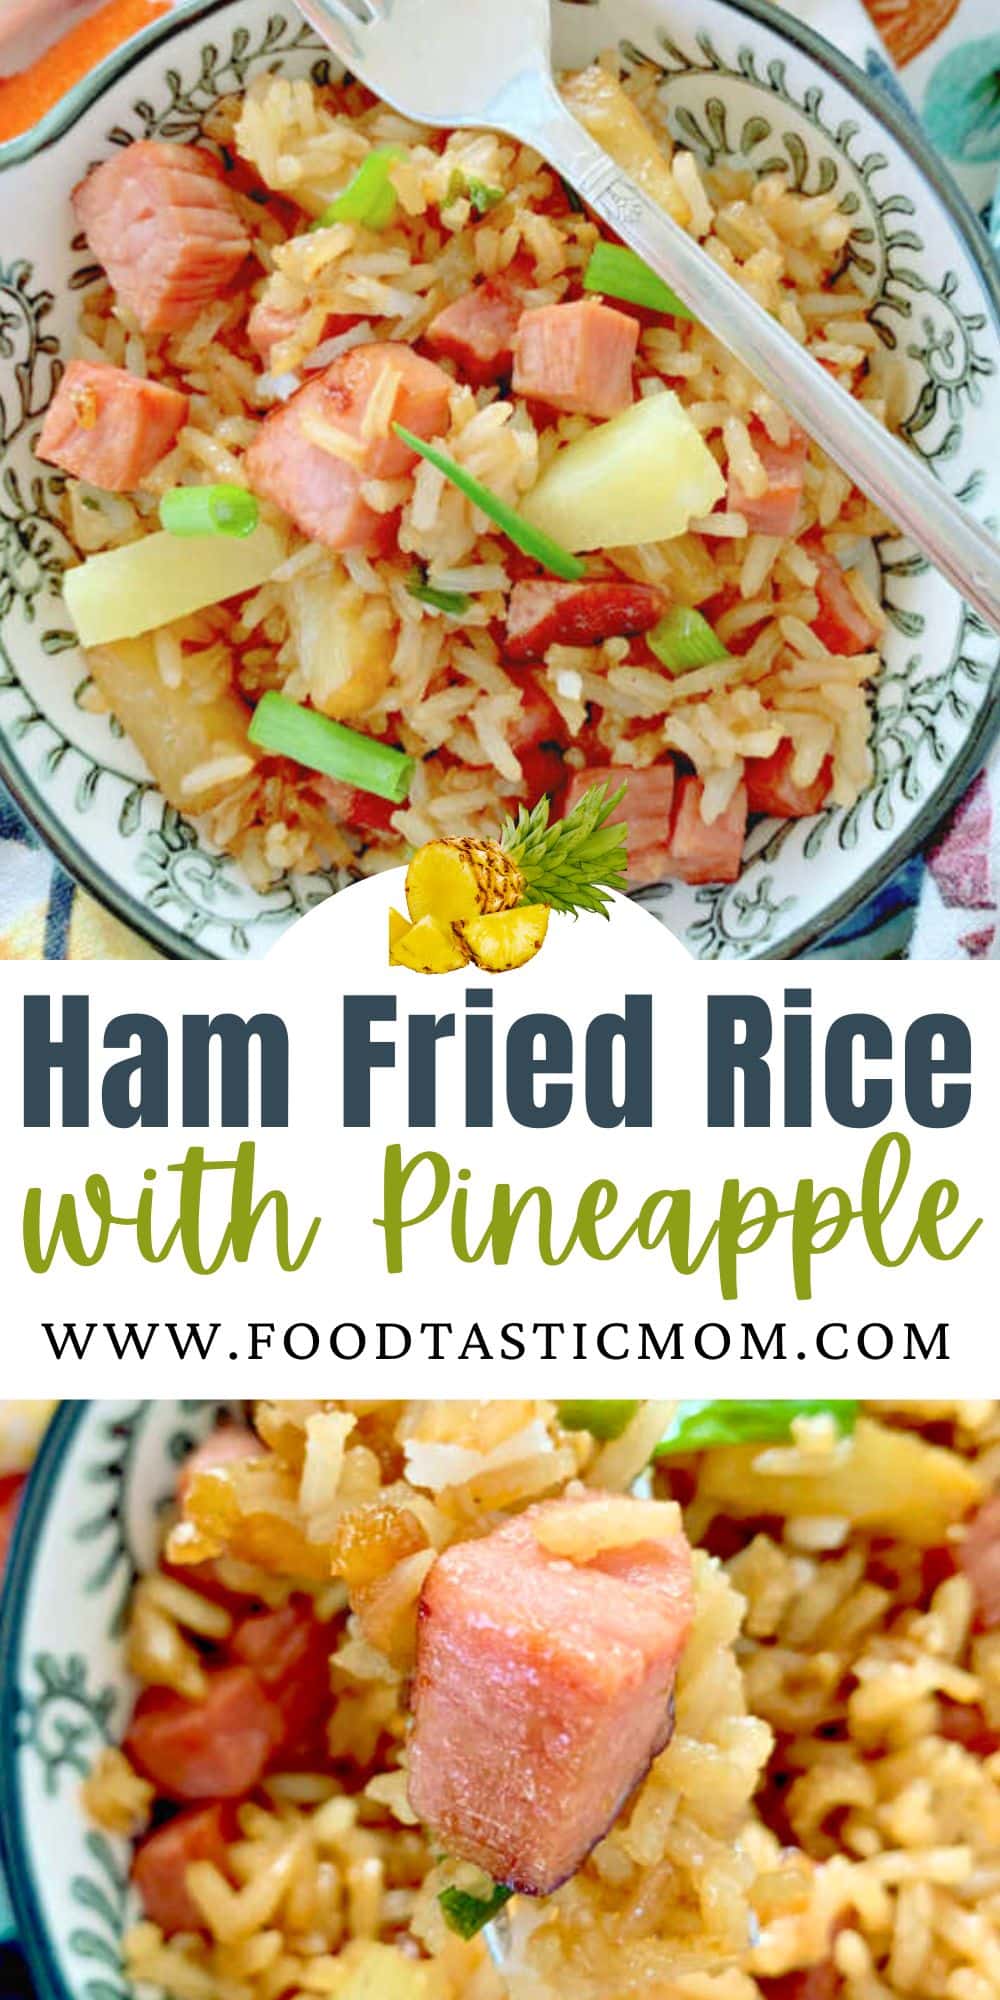 Easy and delicious fried rice recipe that is perfect for leftover ham! Save this recipe for your leftover Christmas and Easter hams. via @foodtasticmom